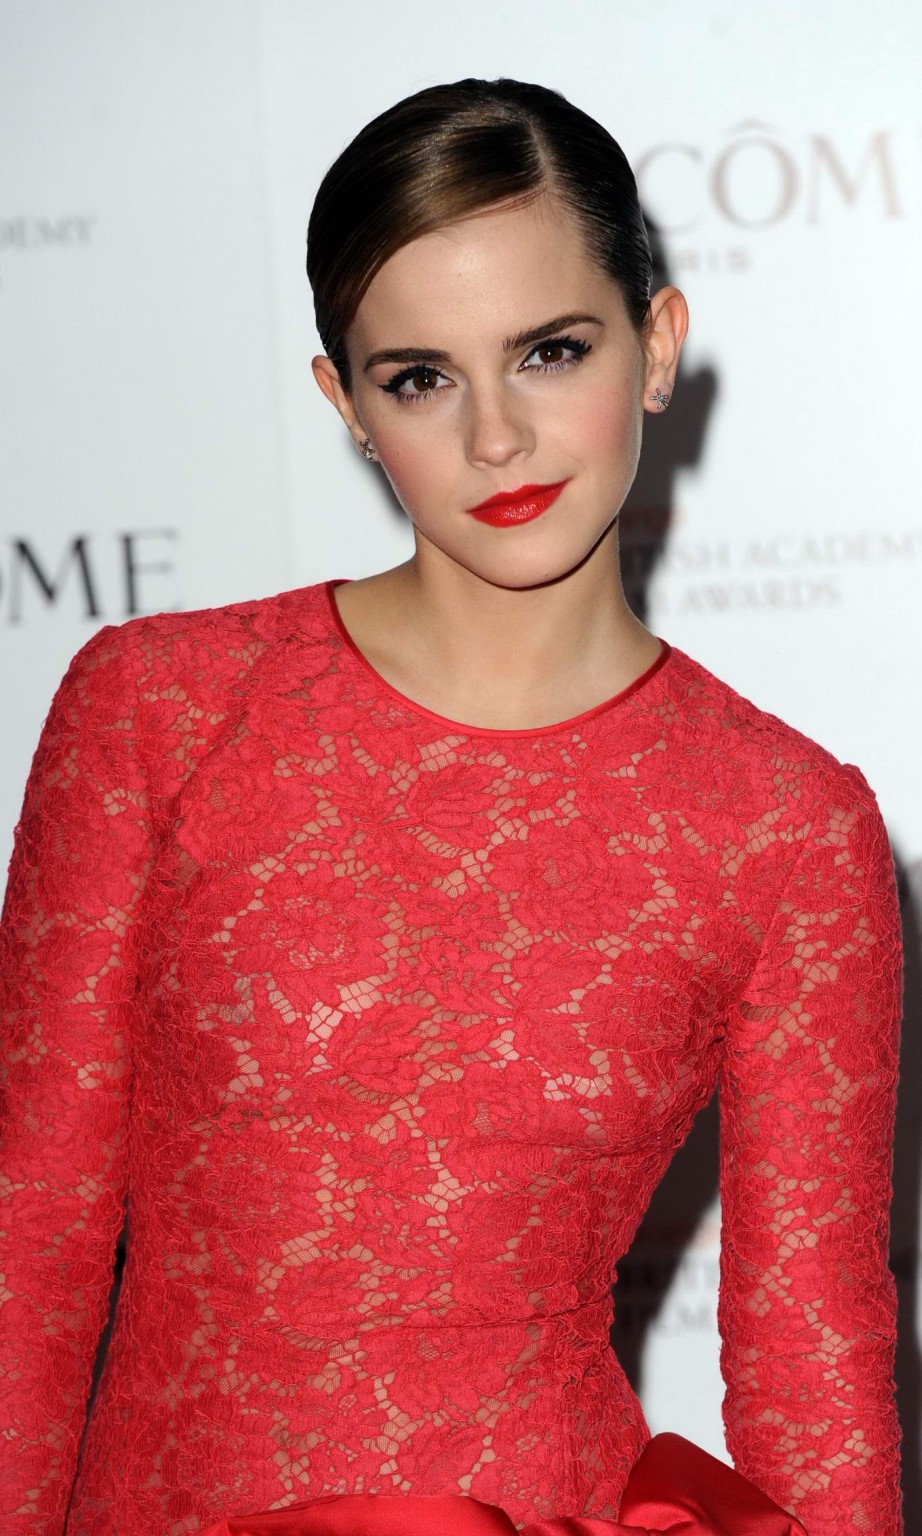 Emma Watson braless wearing red see through lace dress at pre-BAFTA 2012 party #75274505